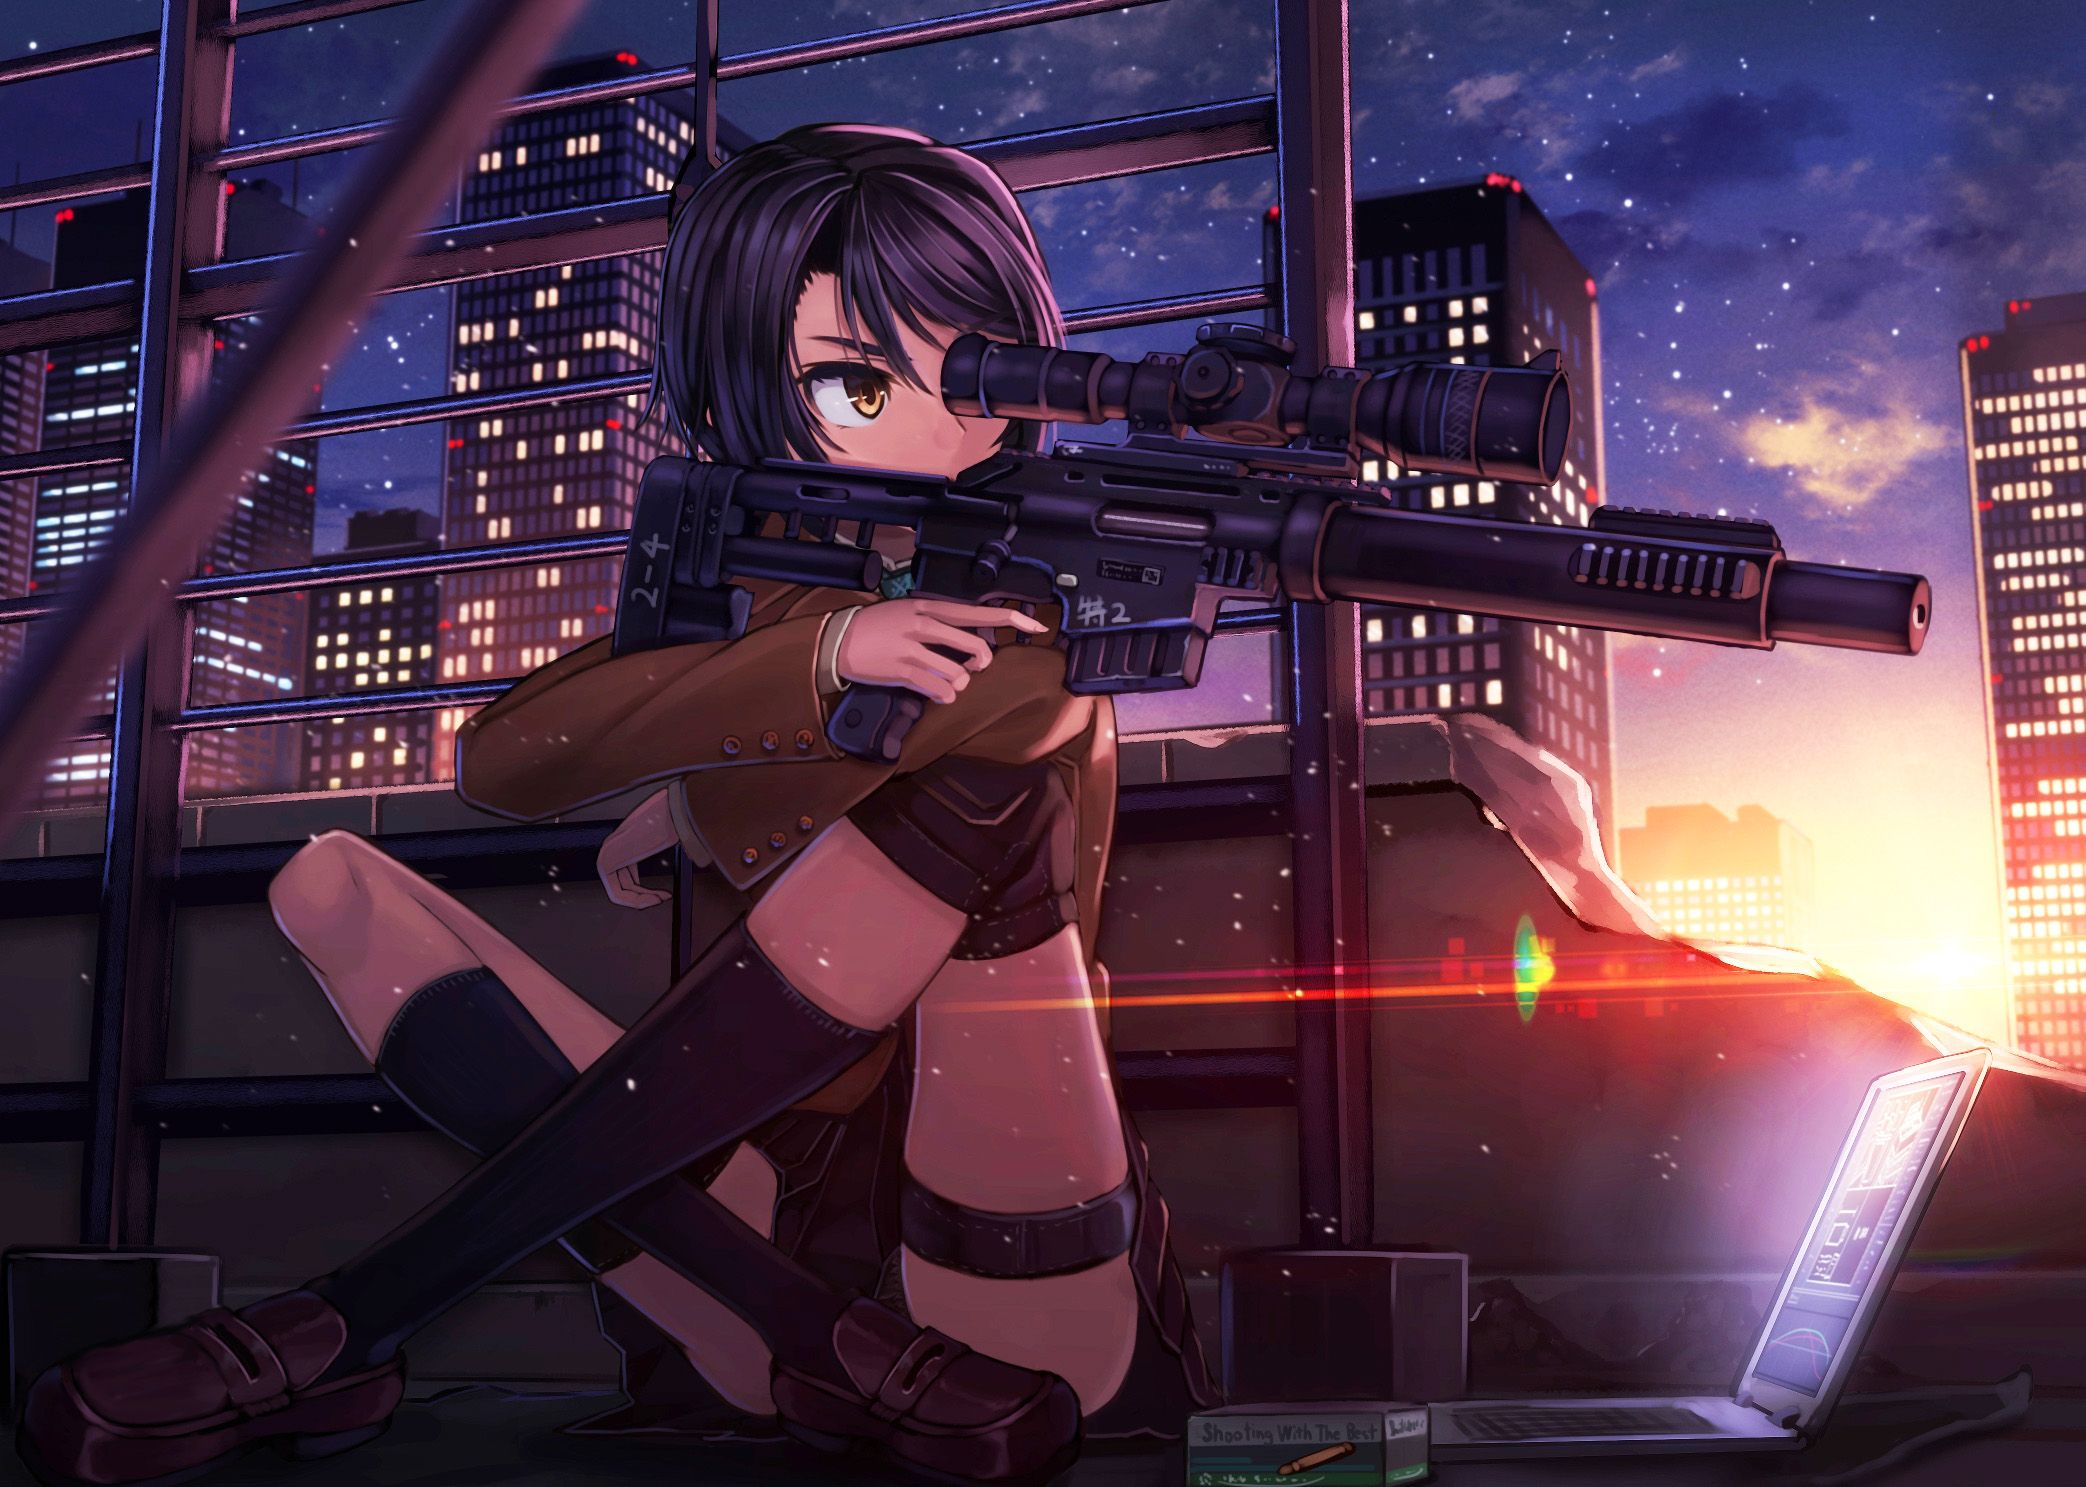 Sniper Girl In Anime Onigirl Wallpapers And Images SexiezPicz Web Porn